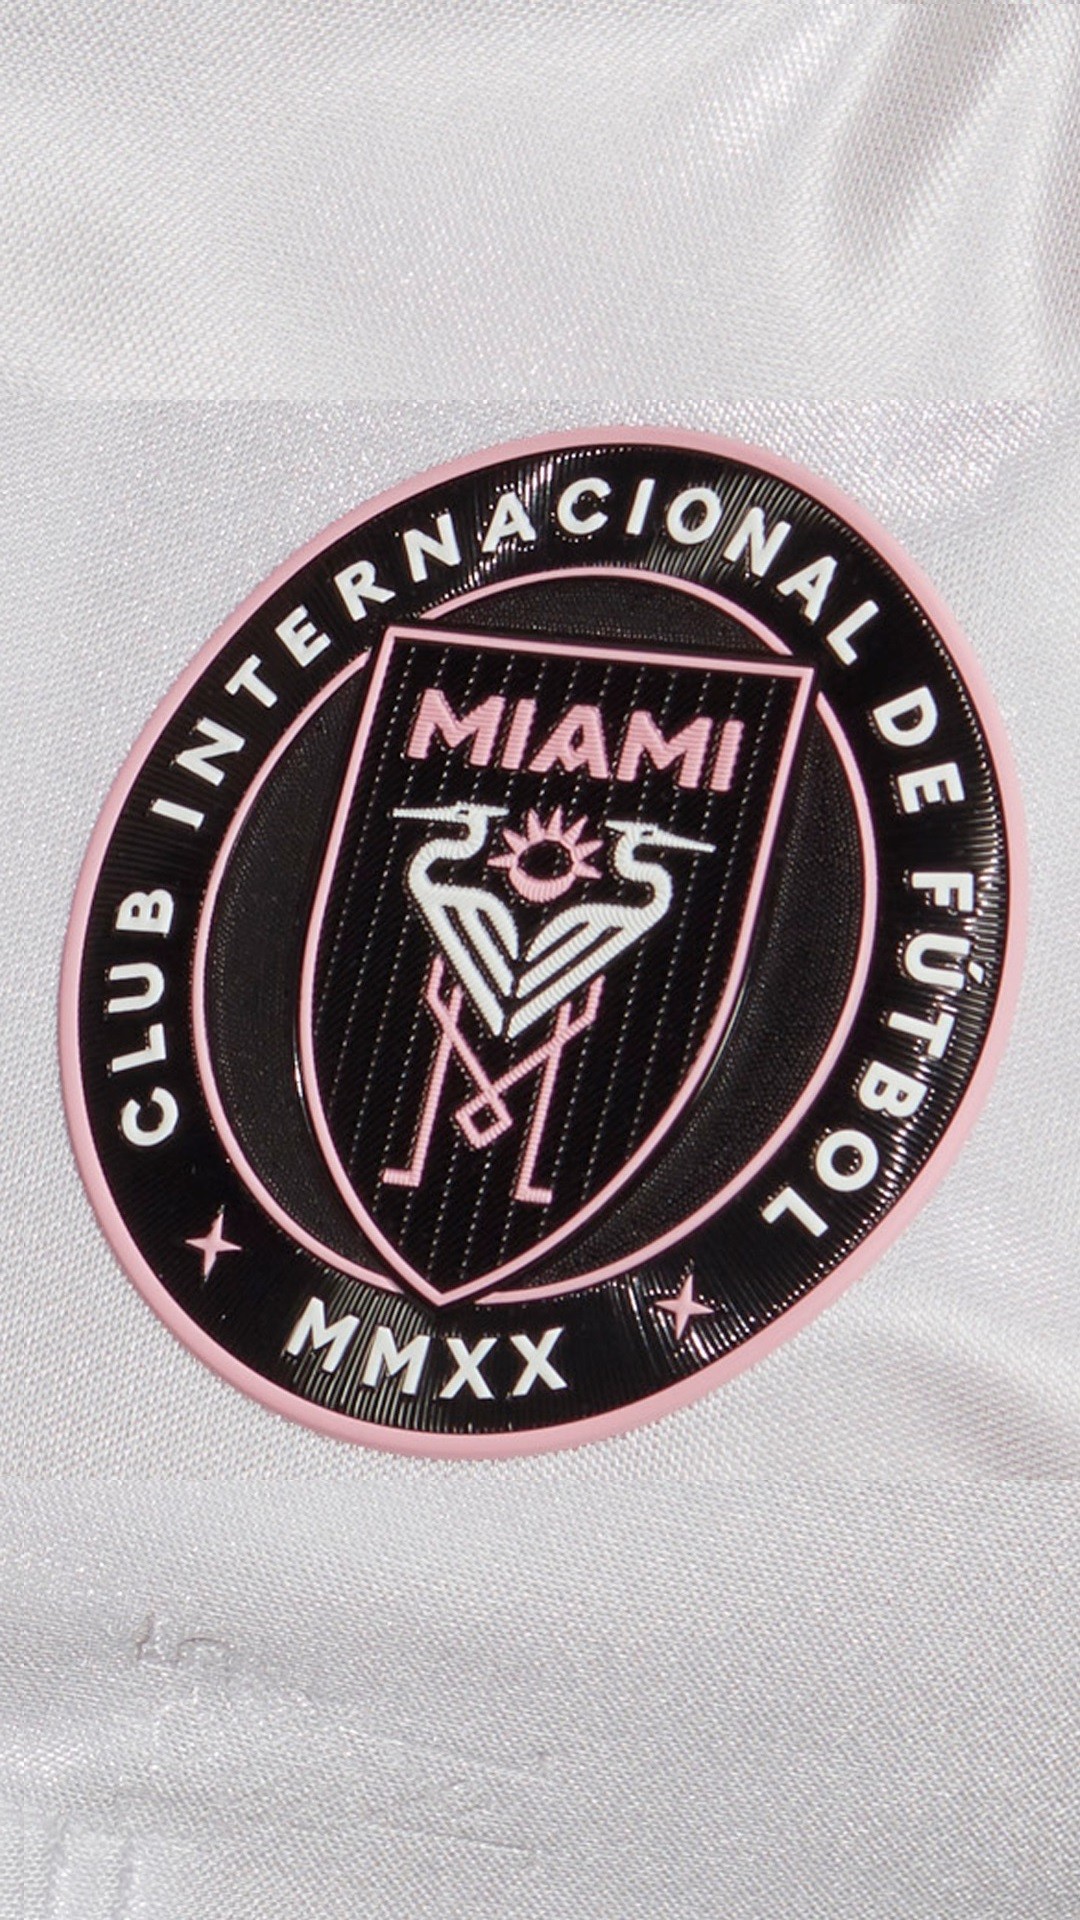 iPhone Wallpaper HD Inter Miami CF with high-resolution 1080x1920 pixel. You can use this wallpaper for your Desktop Computers, Mac Screensavers, Windows Backgrounds, iPhone Wallpapers, Tablet or Android Lock screen and another Mobile device